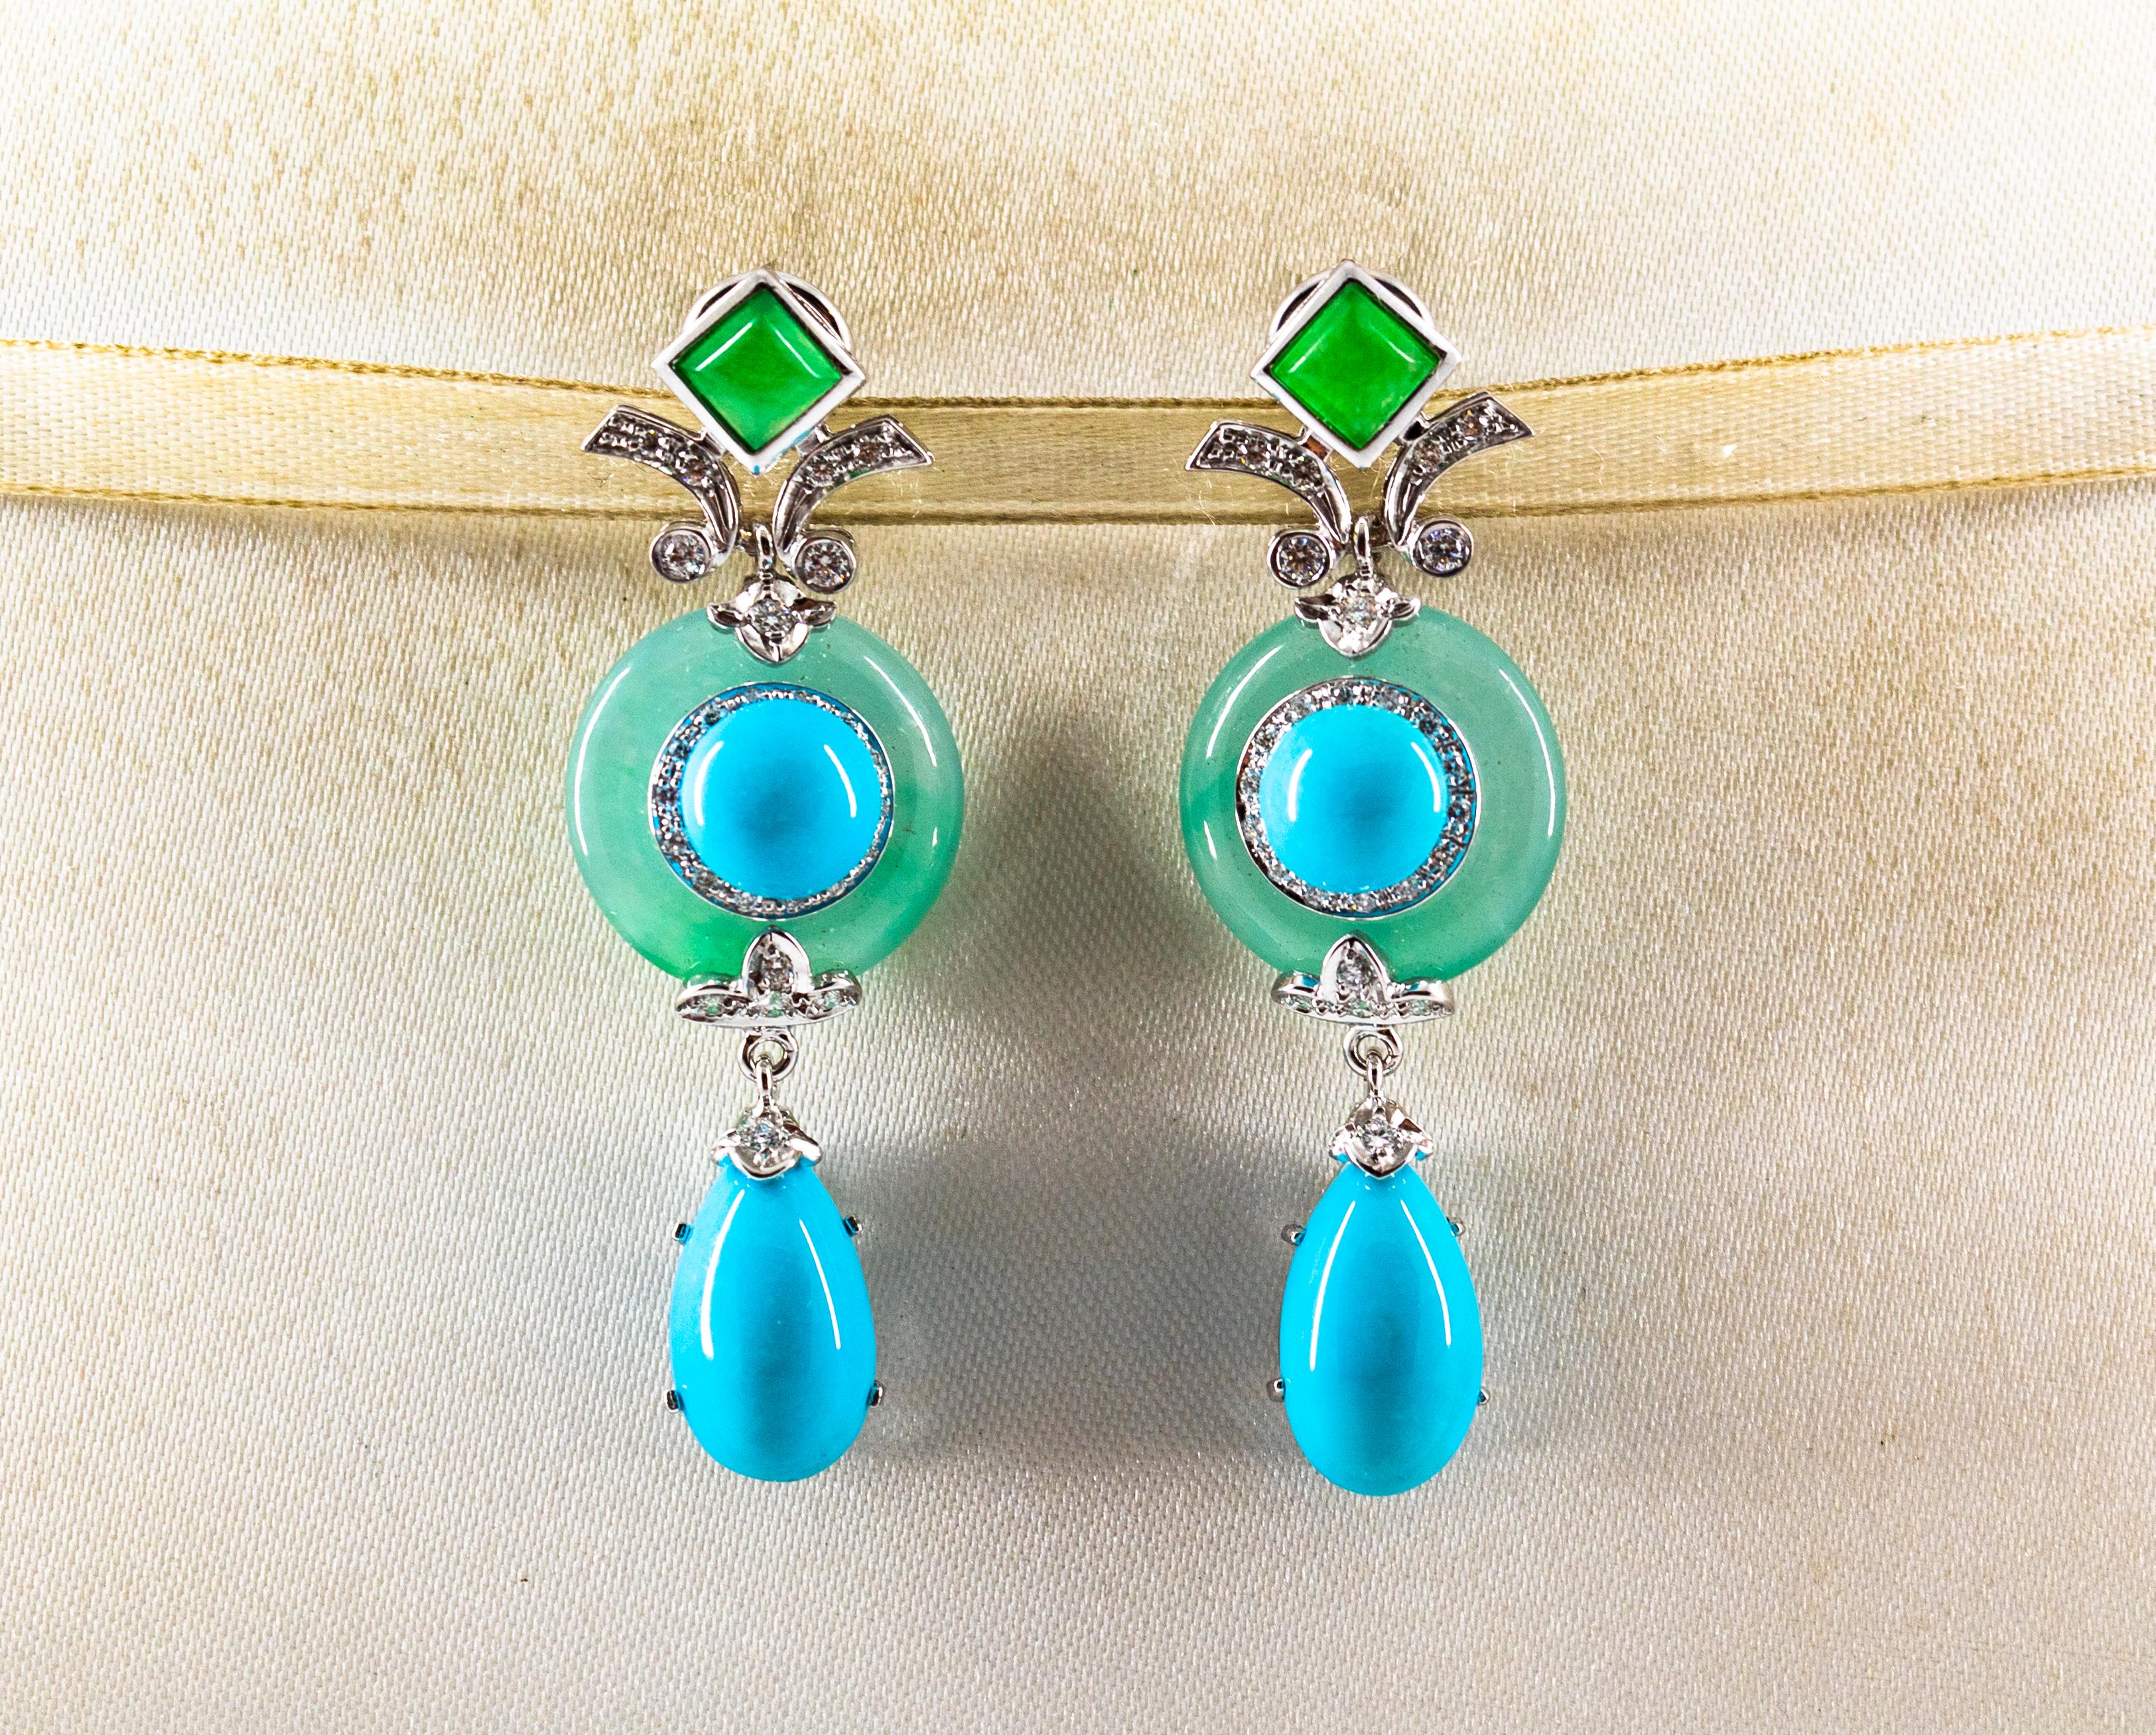 These Clip-On Earrings are made of 14K White Gold.
These Earrings have 0.60 Carats of White Diamonds.
These Earrings have also Natural Turquoise and Jade.
All our Earrings have pins for pierced ears but we can change the closure and make any of our